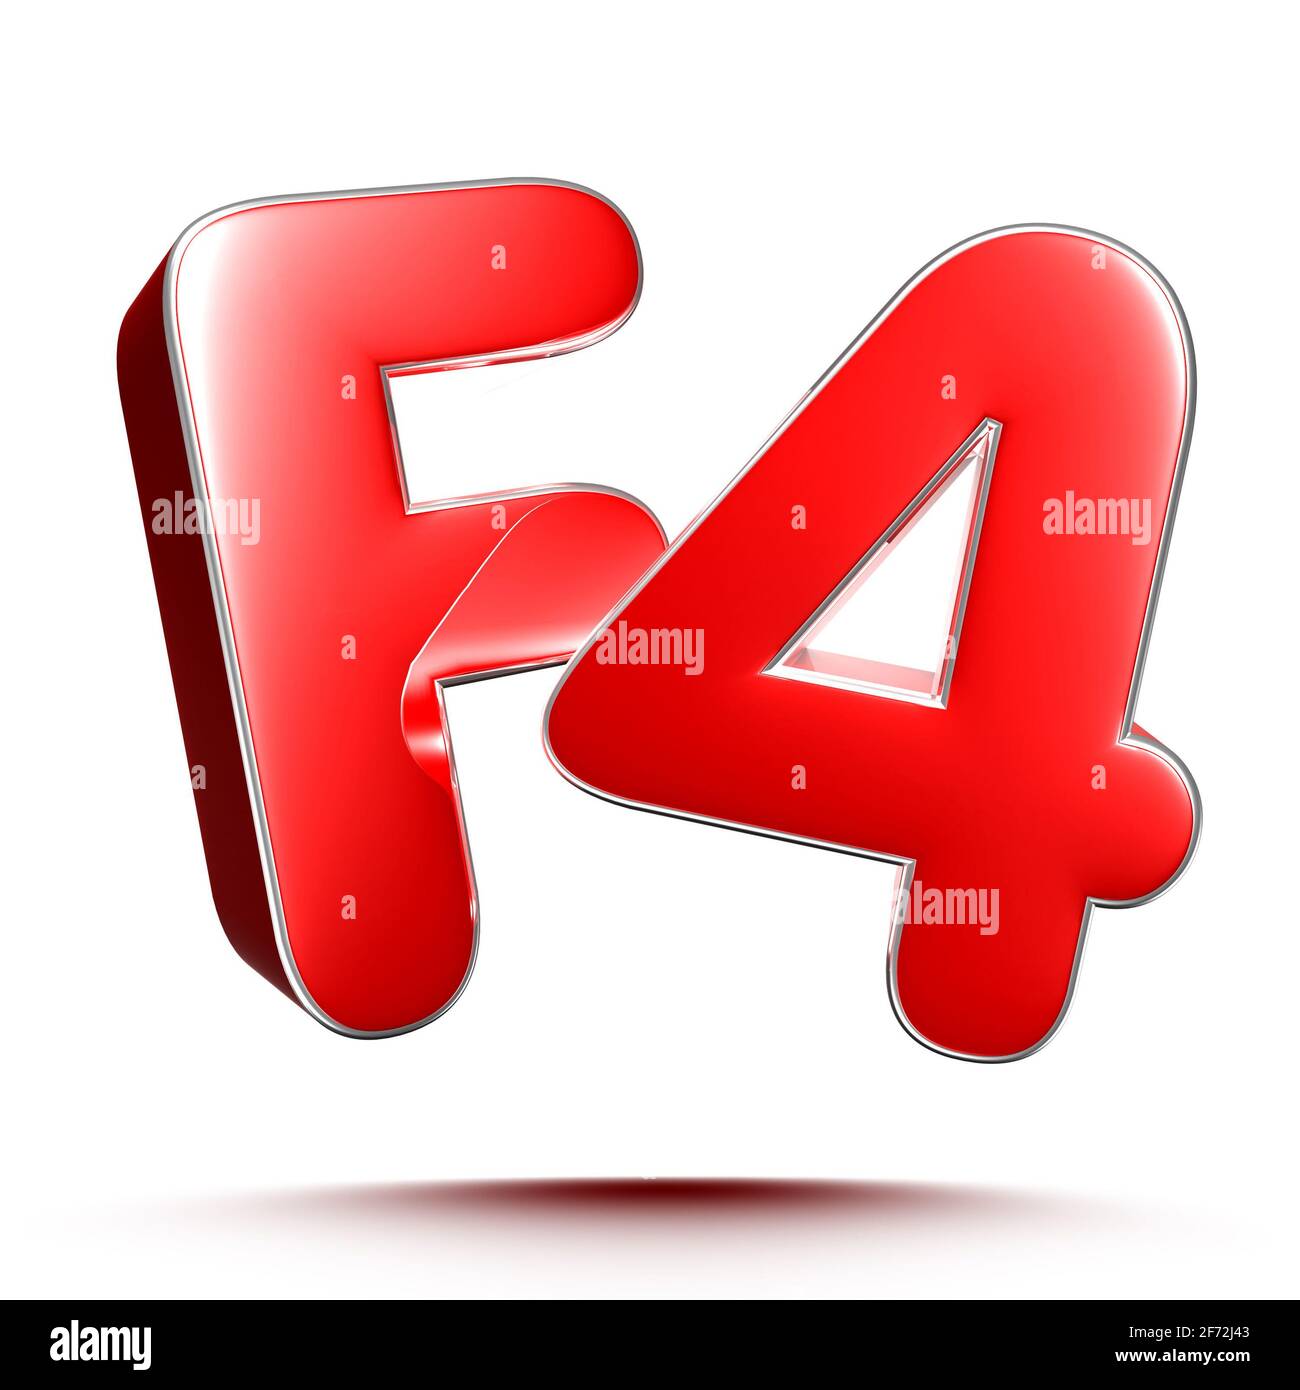 F4 Red 3d Illustration On White Background With Clipping Path Stock